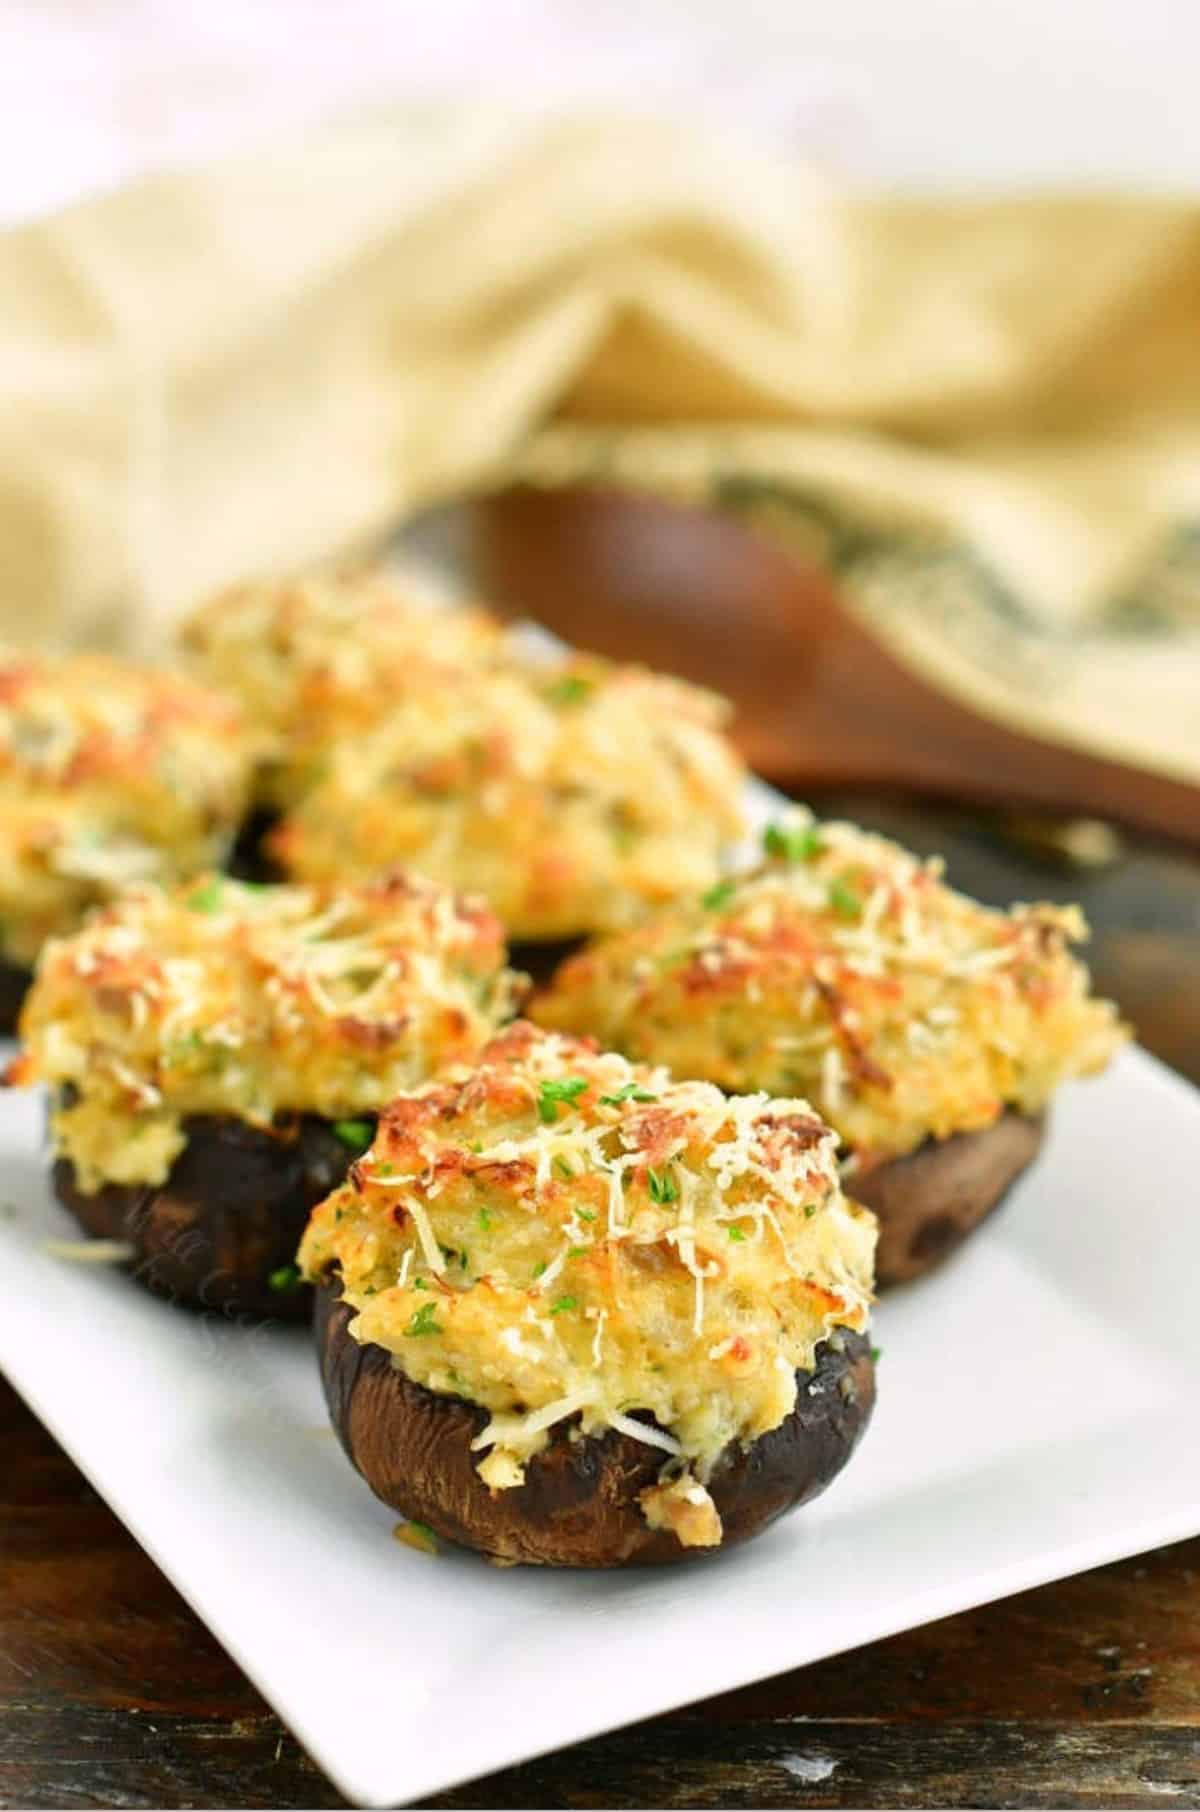 several stuffed mushrooms on a white plate with wooden spoon on the background an burlap towel.